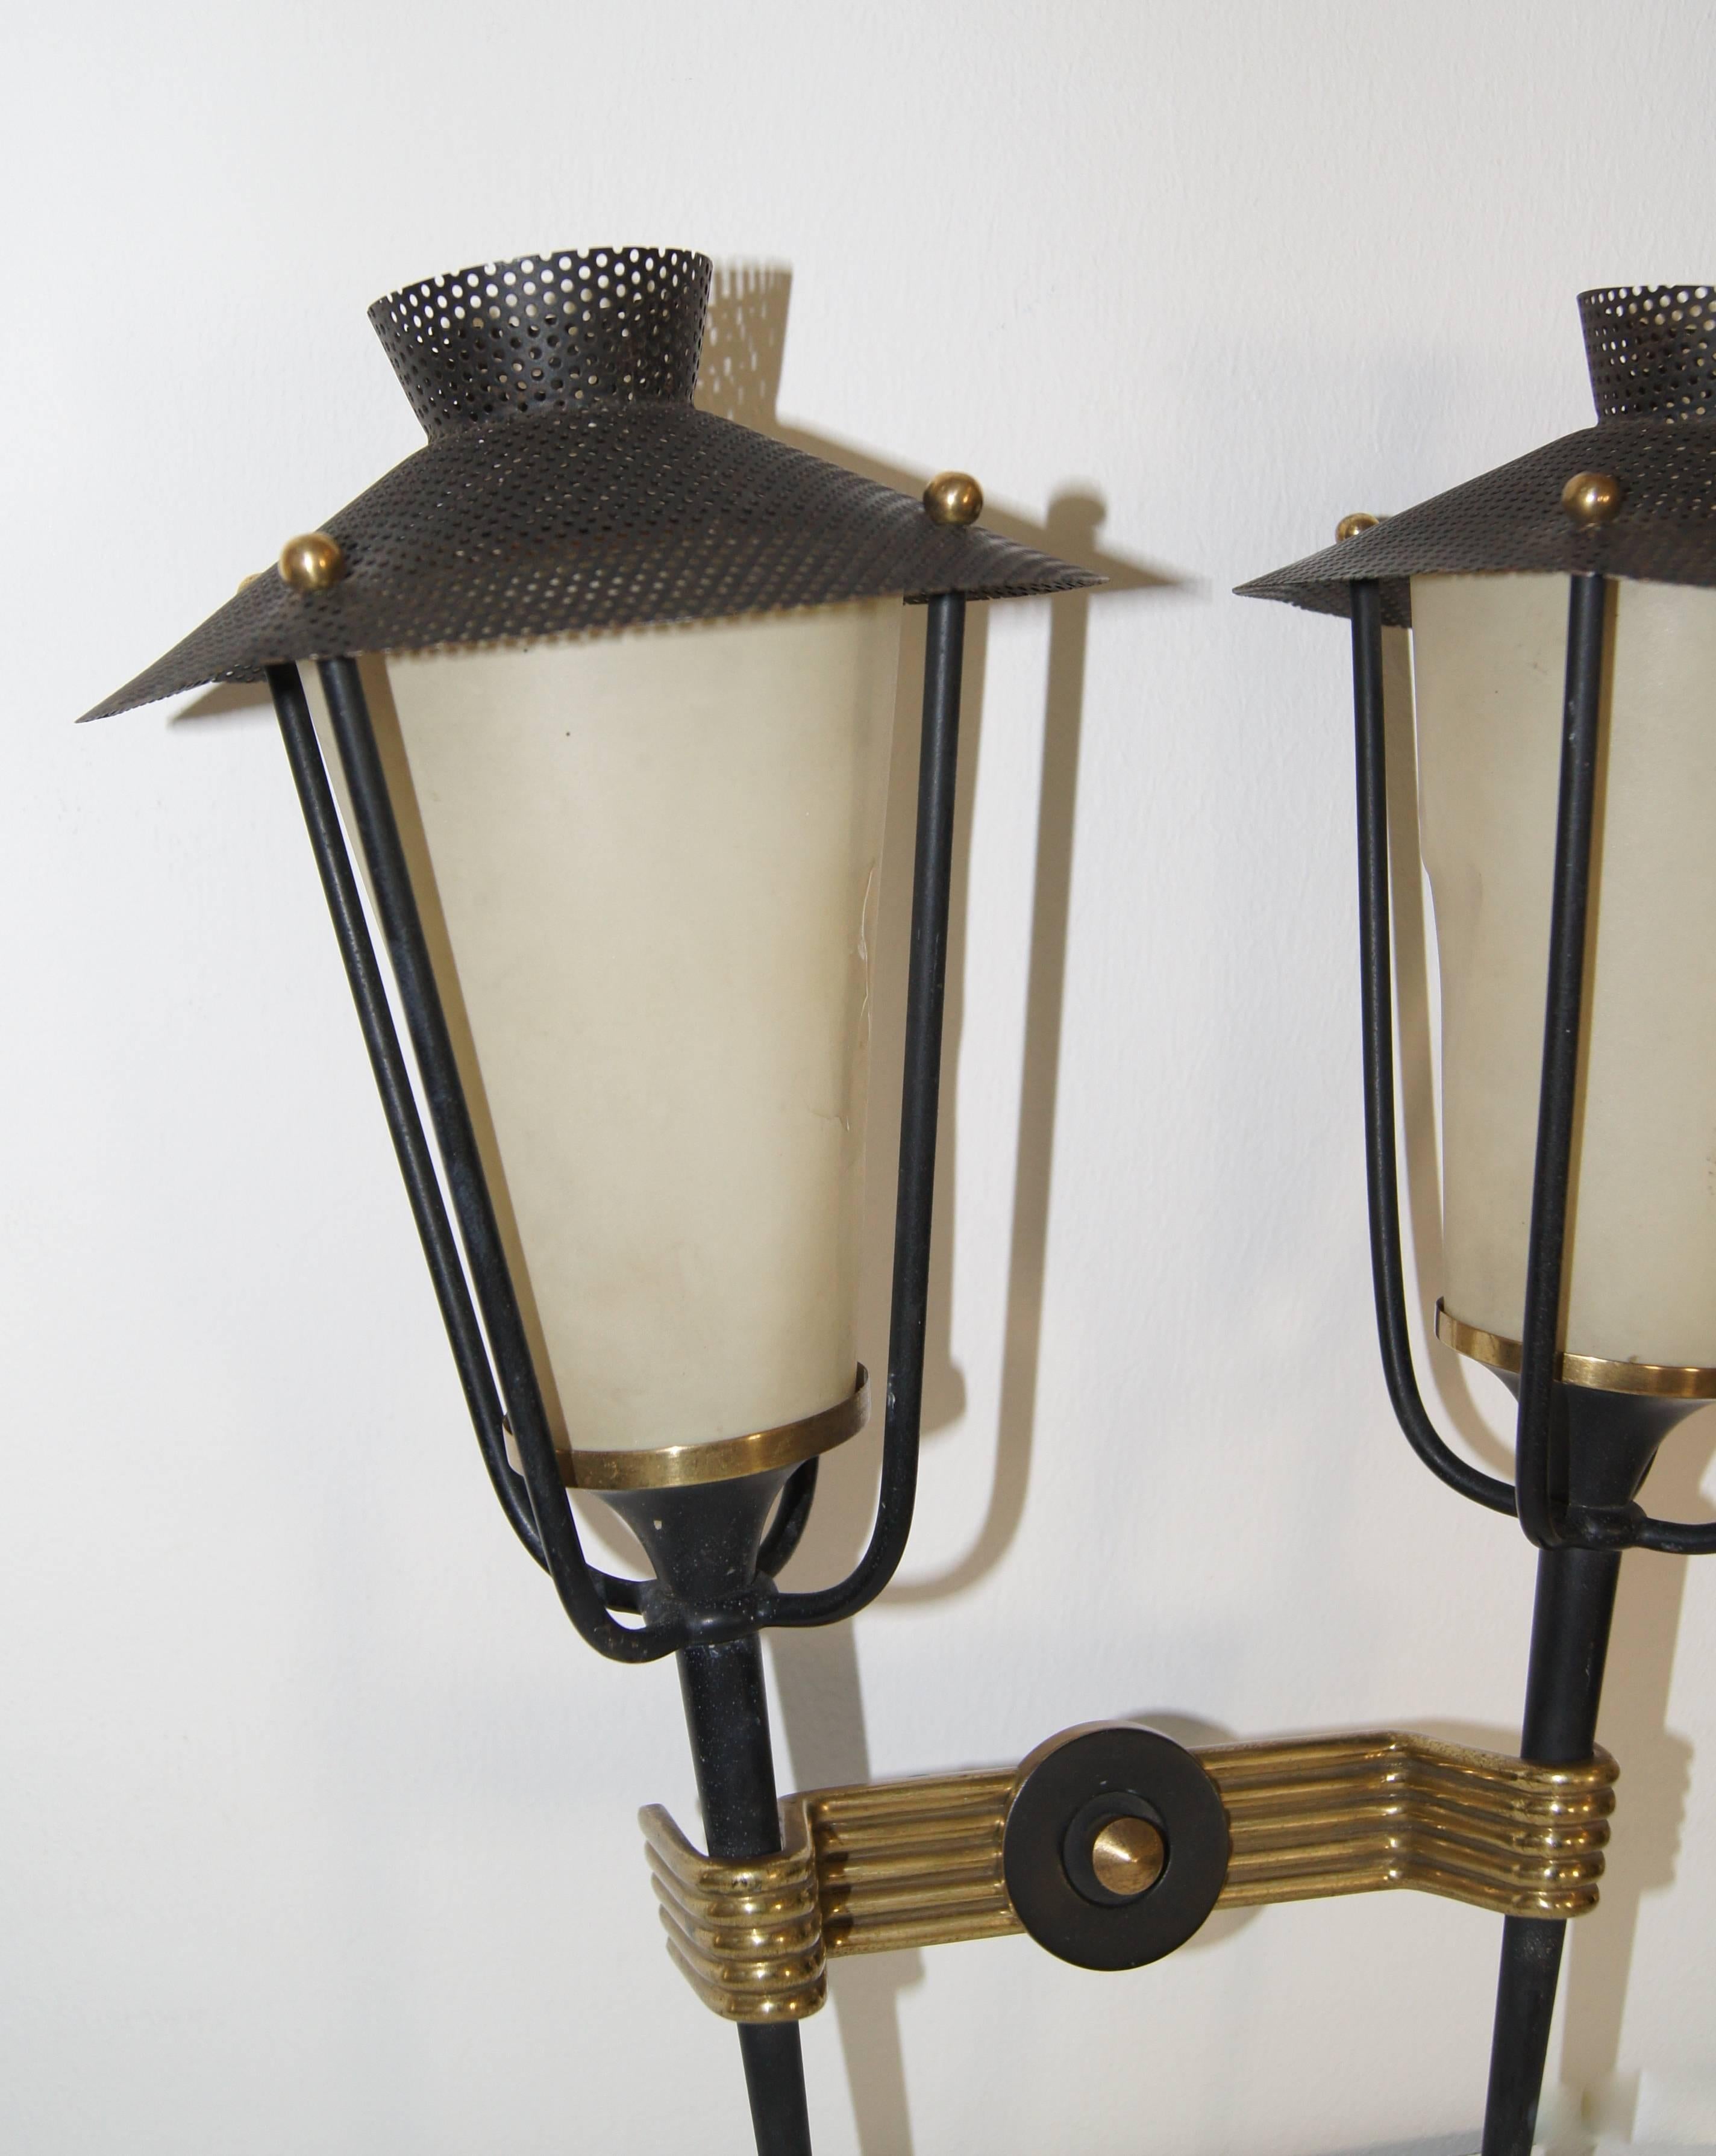 Two lanterns tied together by a brass middle section. Black perforated steel canopies that diffuse the light. The shades are original. A light rapture is visible.
They are a type of cellulose film first made in France in the 1930s.